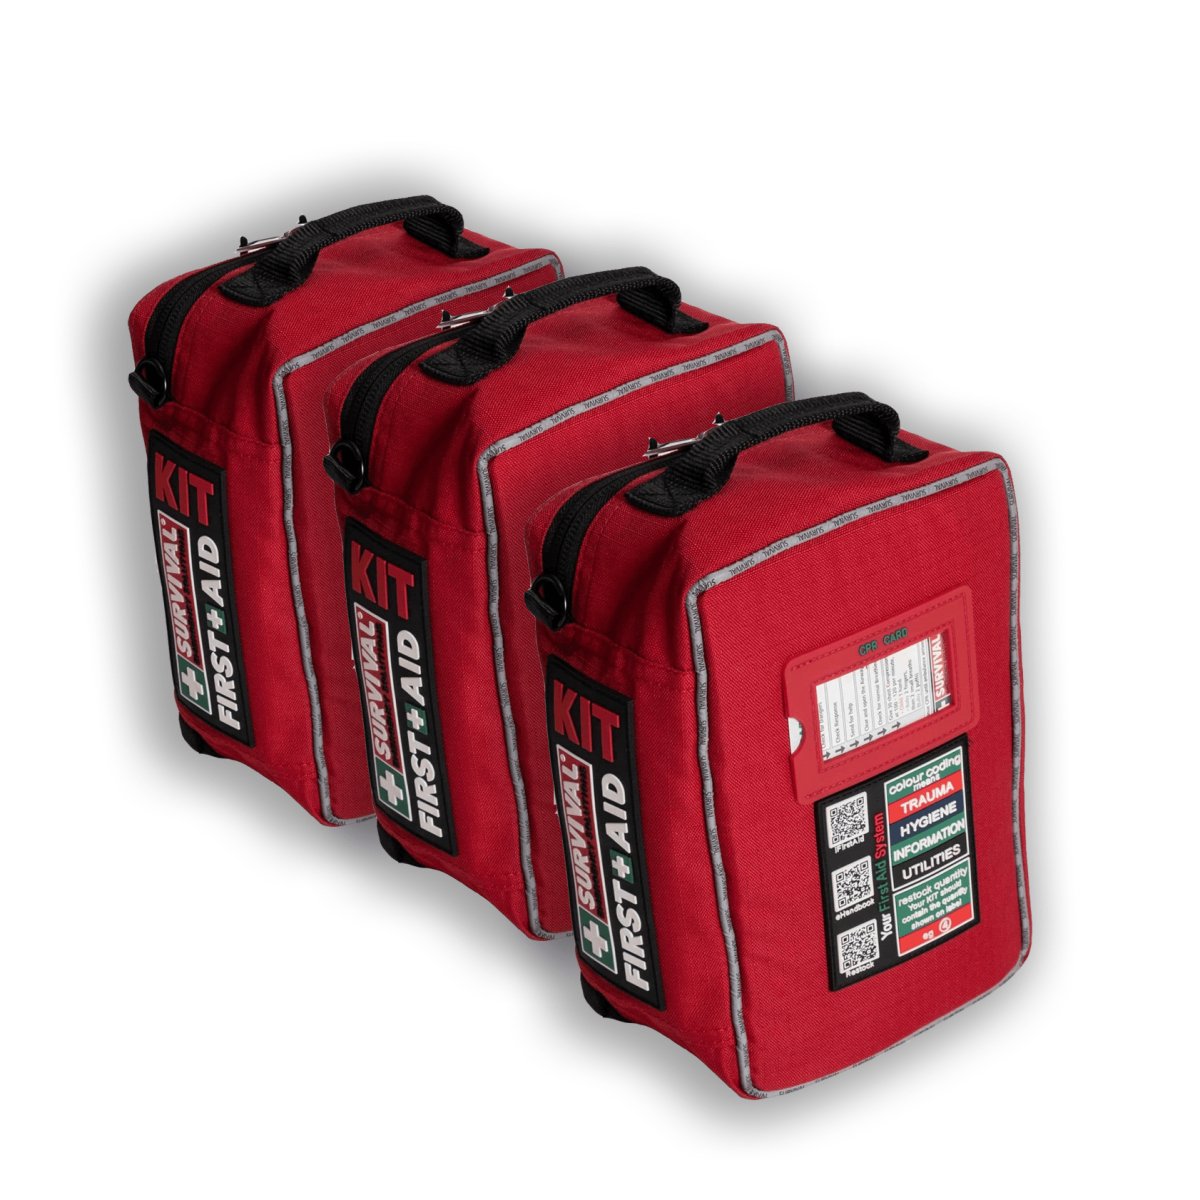 SURVIVAL WORKPLACE FIRST AID KIT | Survival Emergency Solutions | A247 Gear